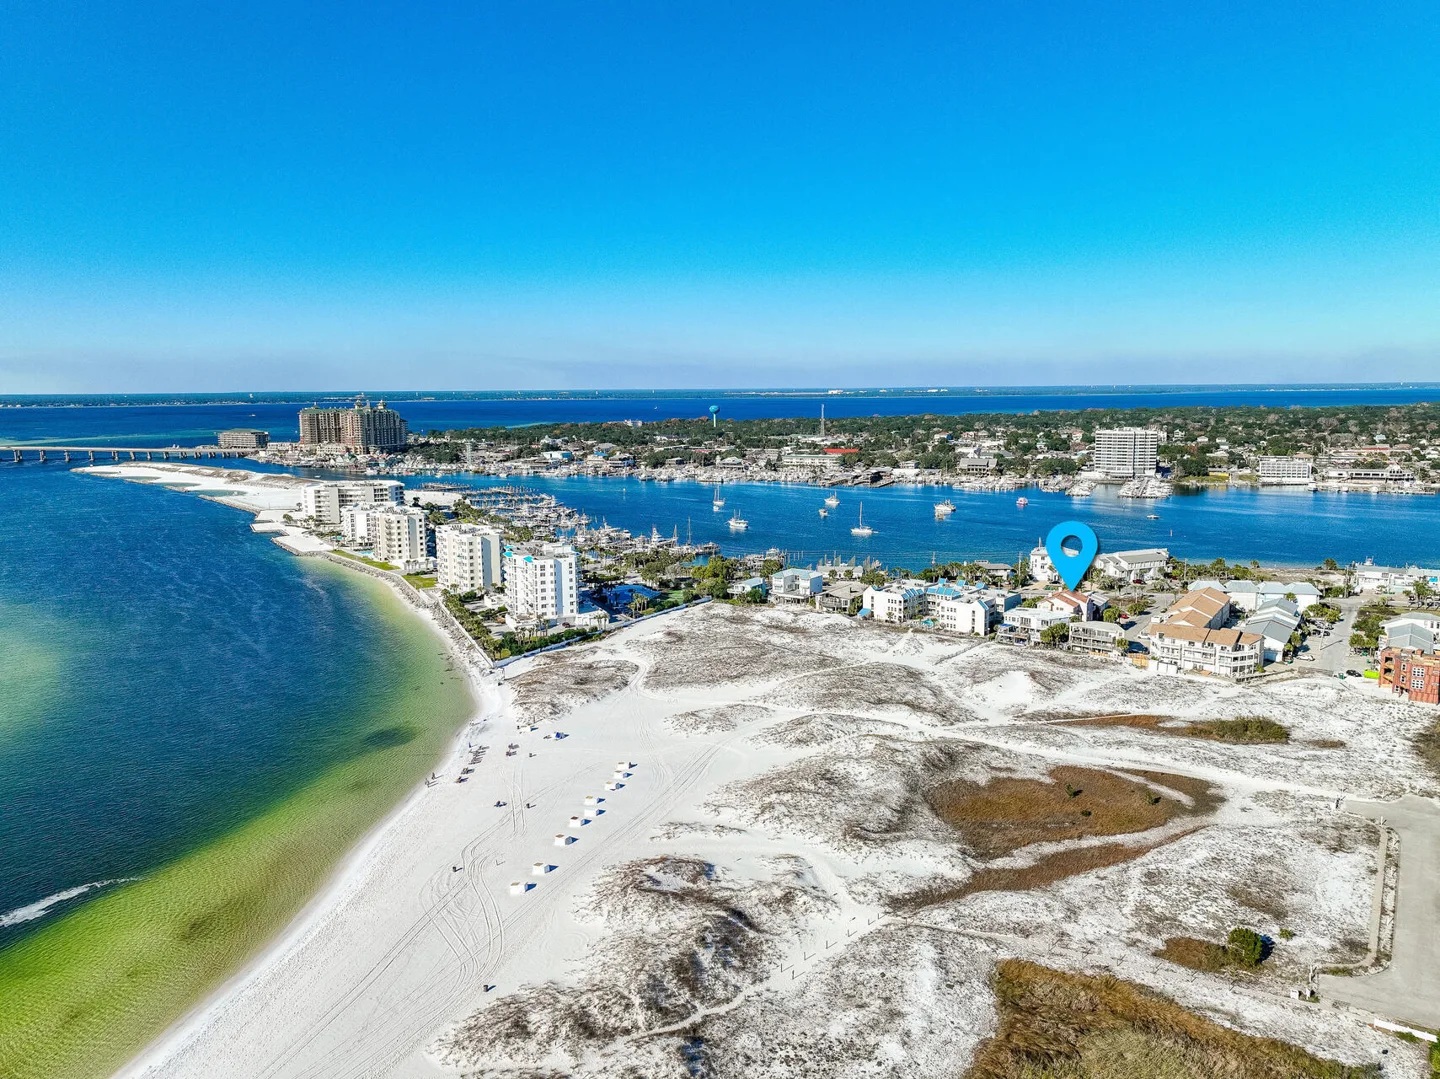 Townhome Ideally Situated Between The Harbor And The Gulf